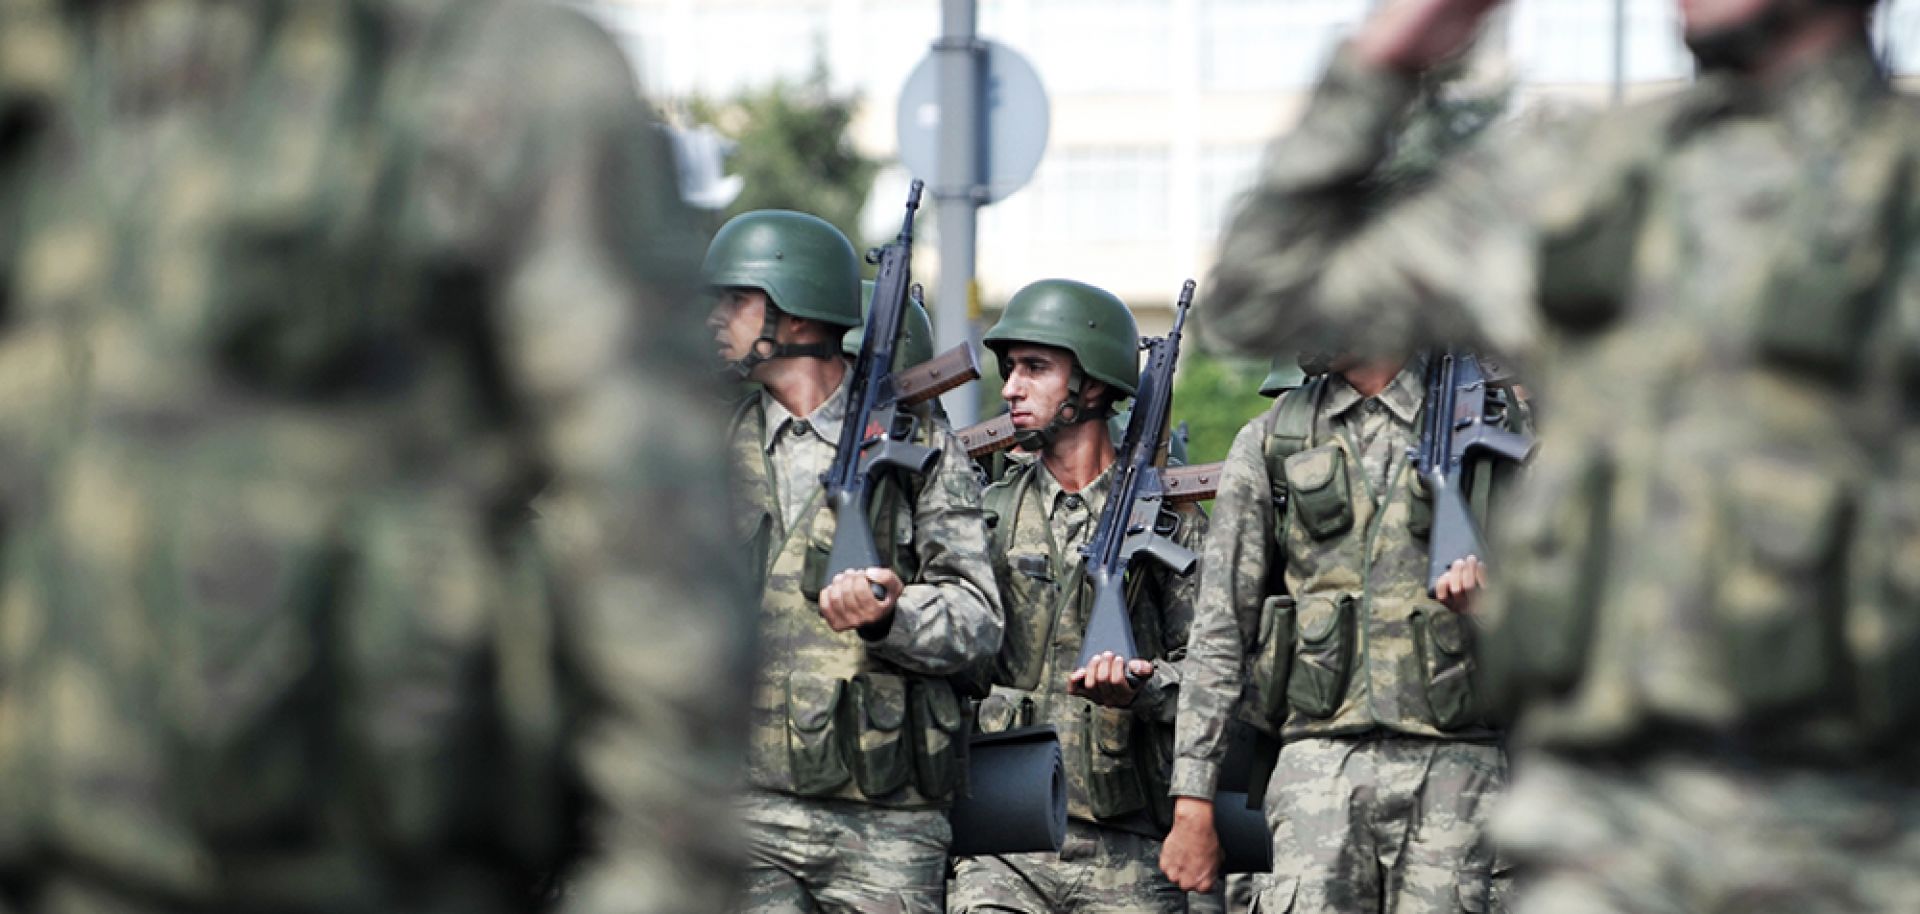 Turkish soldiers march in a parade in Istanbul on Aug. 30, 2013.